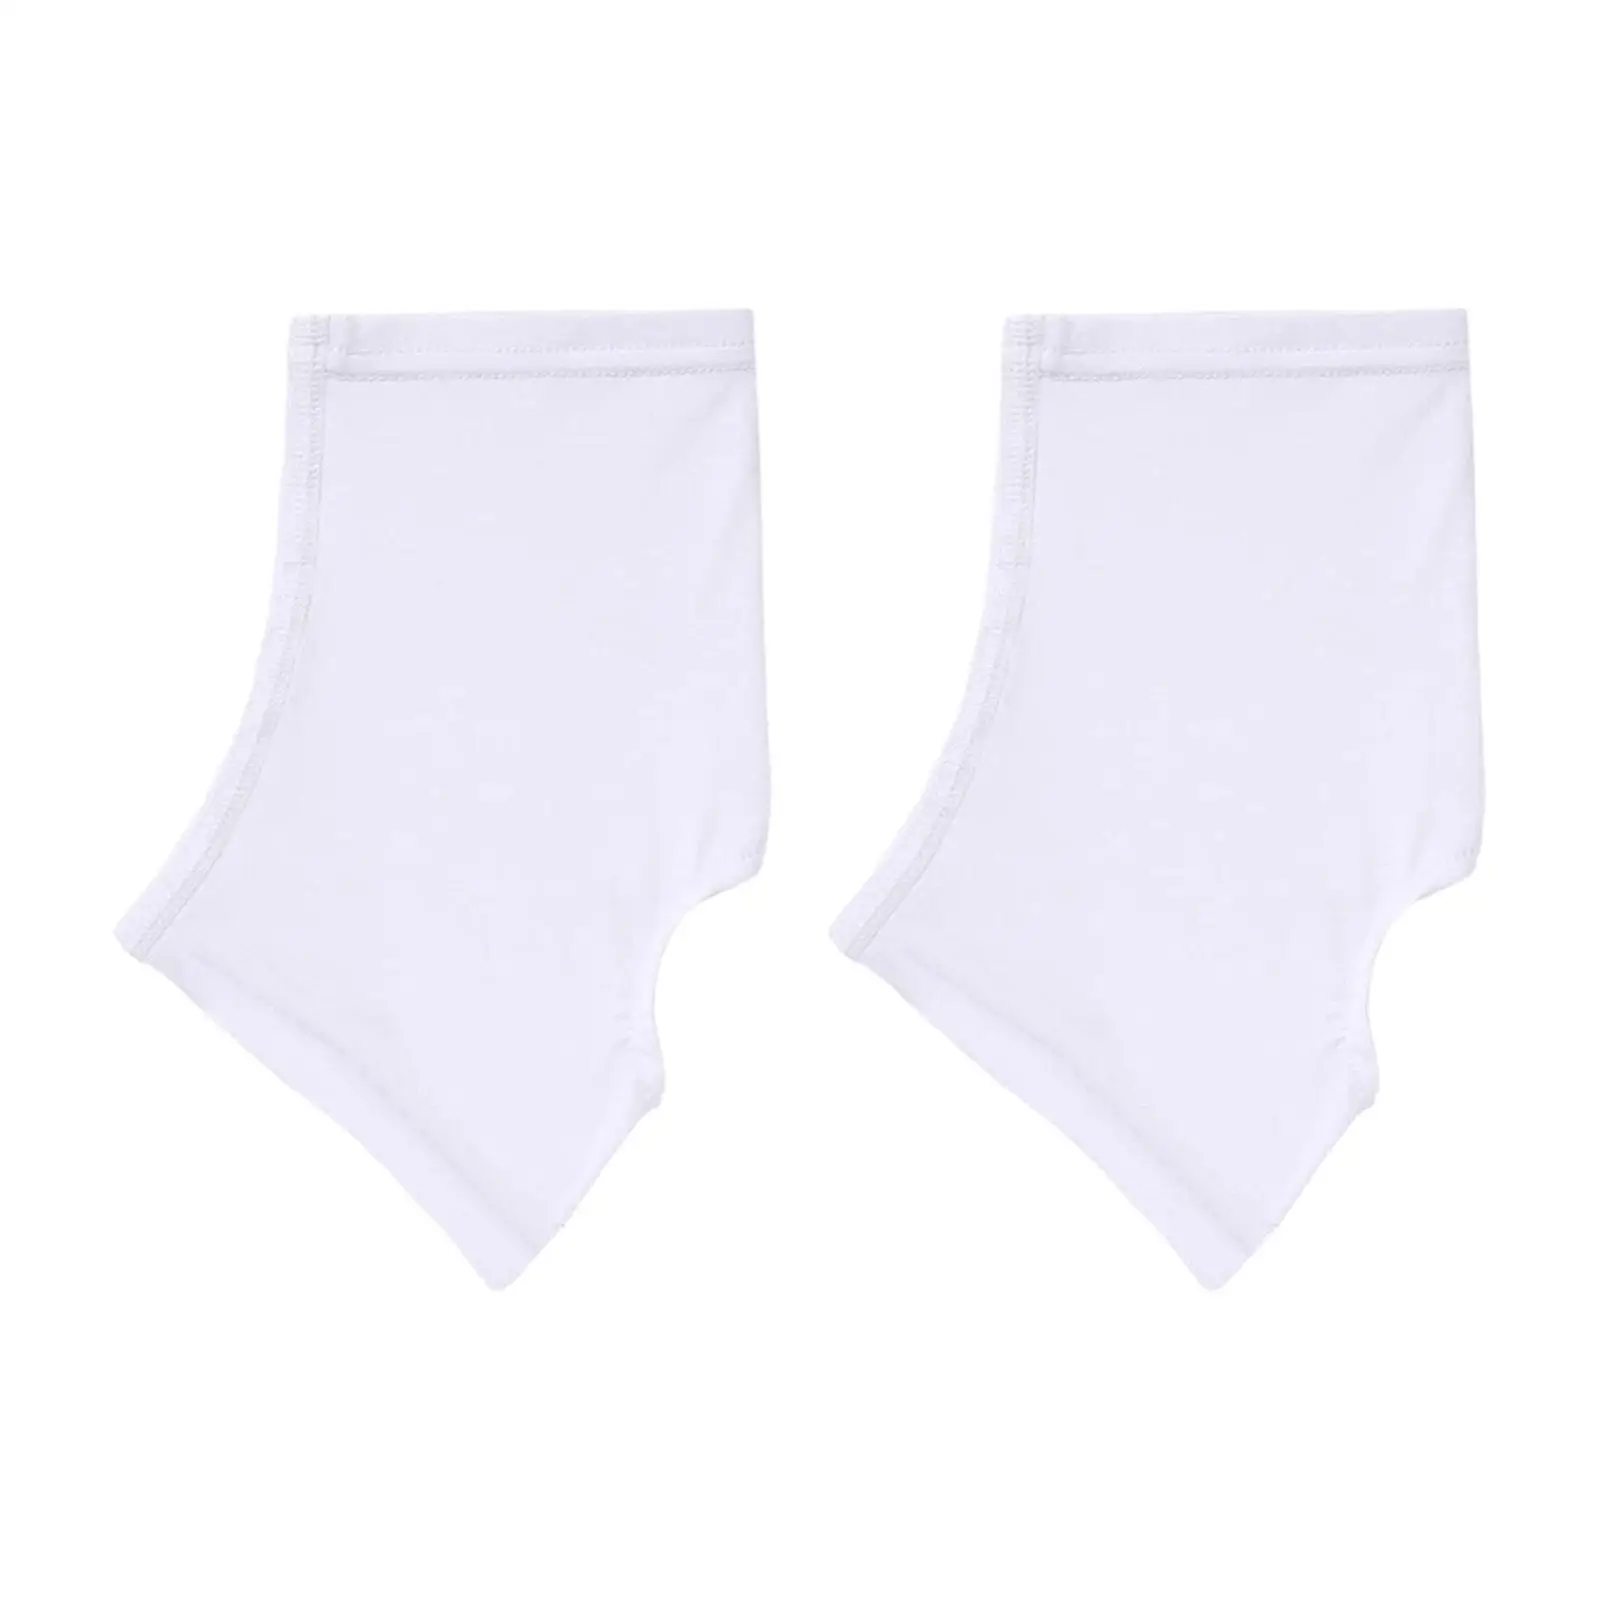 2x Spats Cleat Socks Lacrosse Baseball 1 Pair Elastic Boys and Girls Soccer Teenagers Baseball Sports Spats Cleat Sleeves